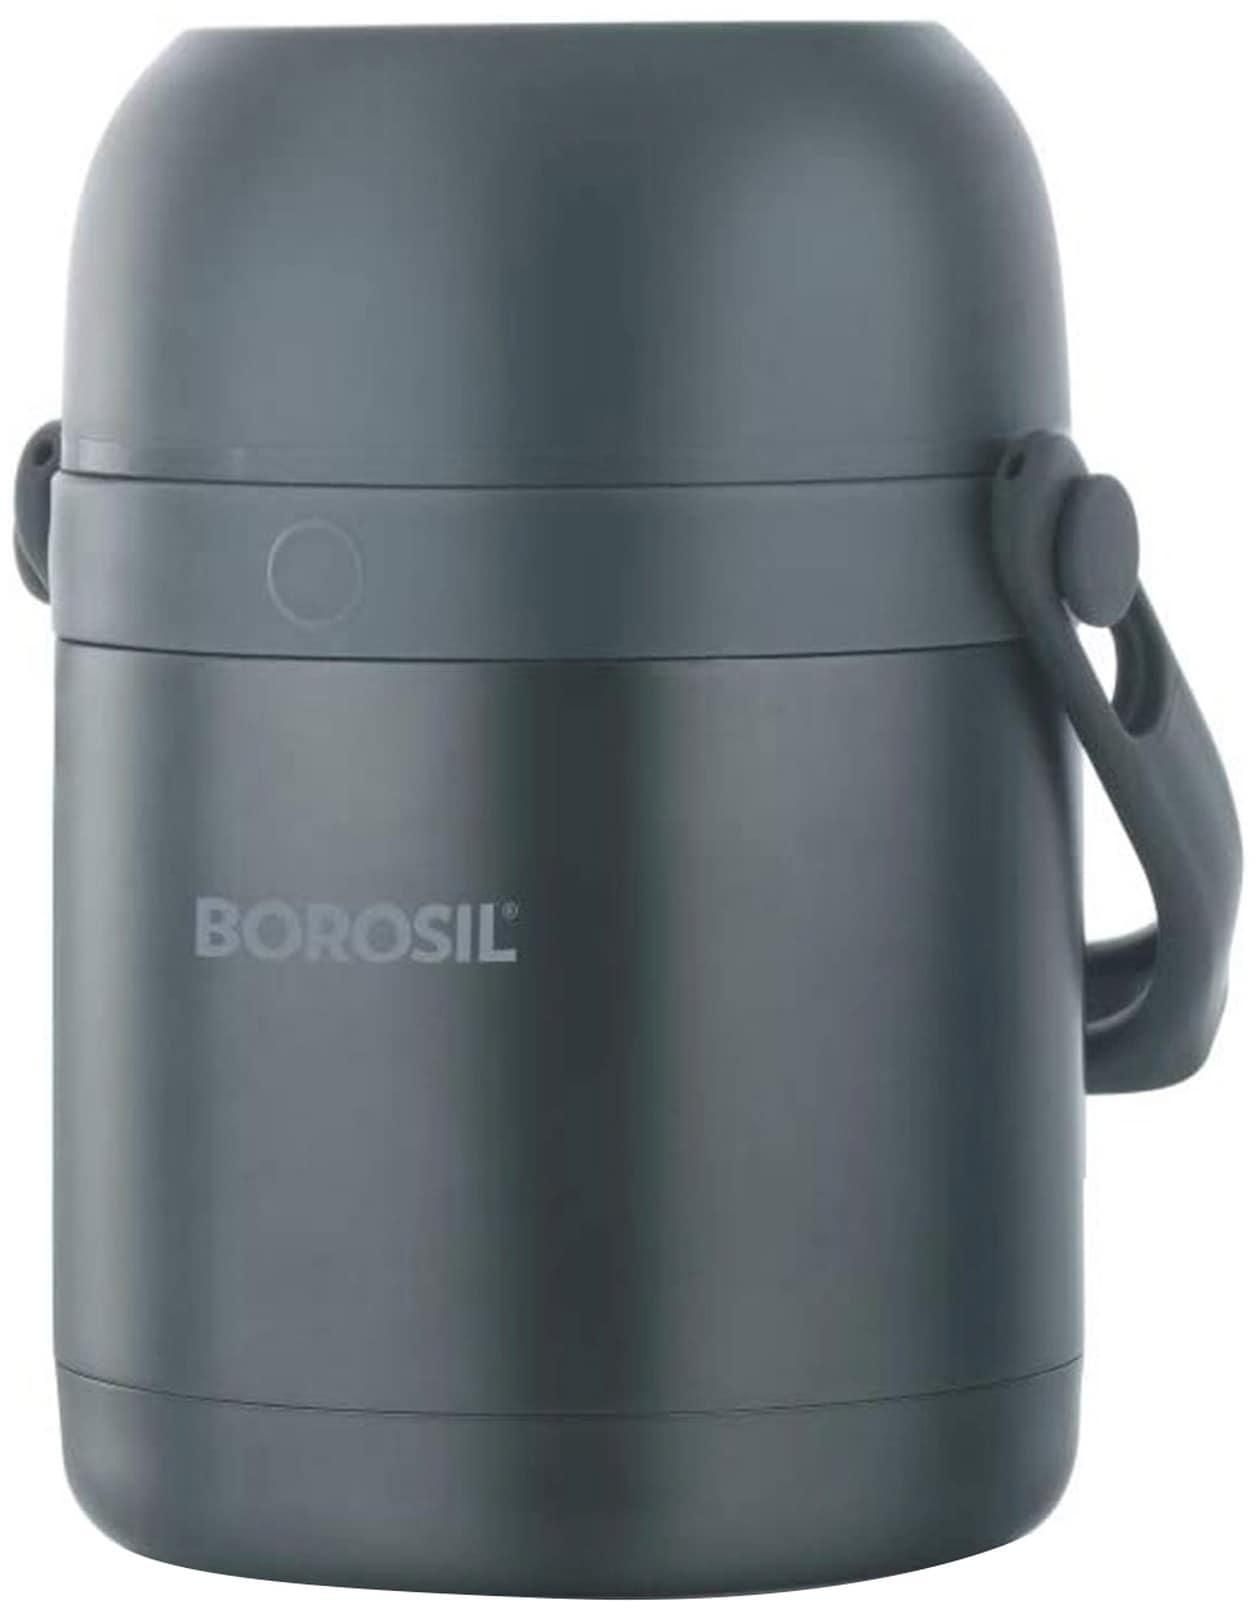 Borosil Hot-N-Fresh 2 Layer Stainless Steel Insulated Lunch Box Grey 1.3L